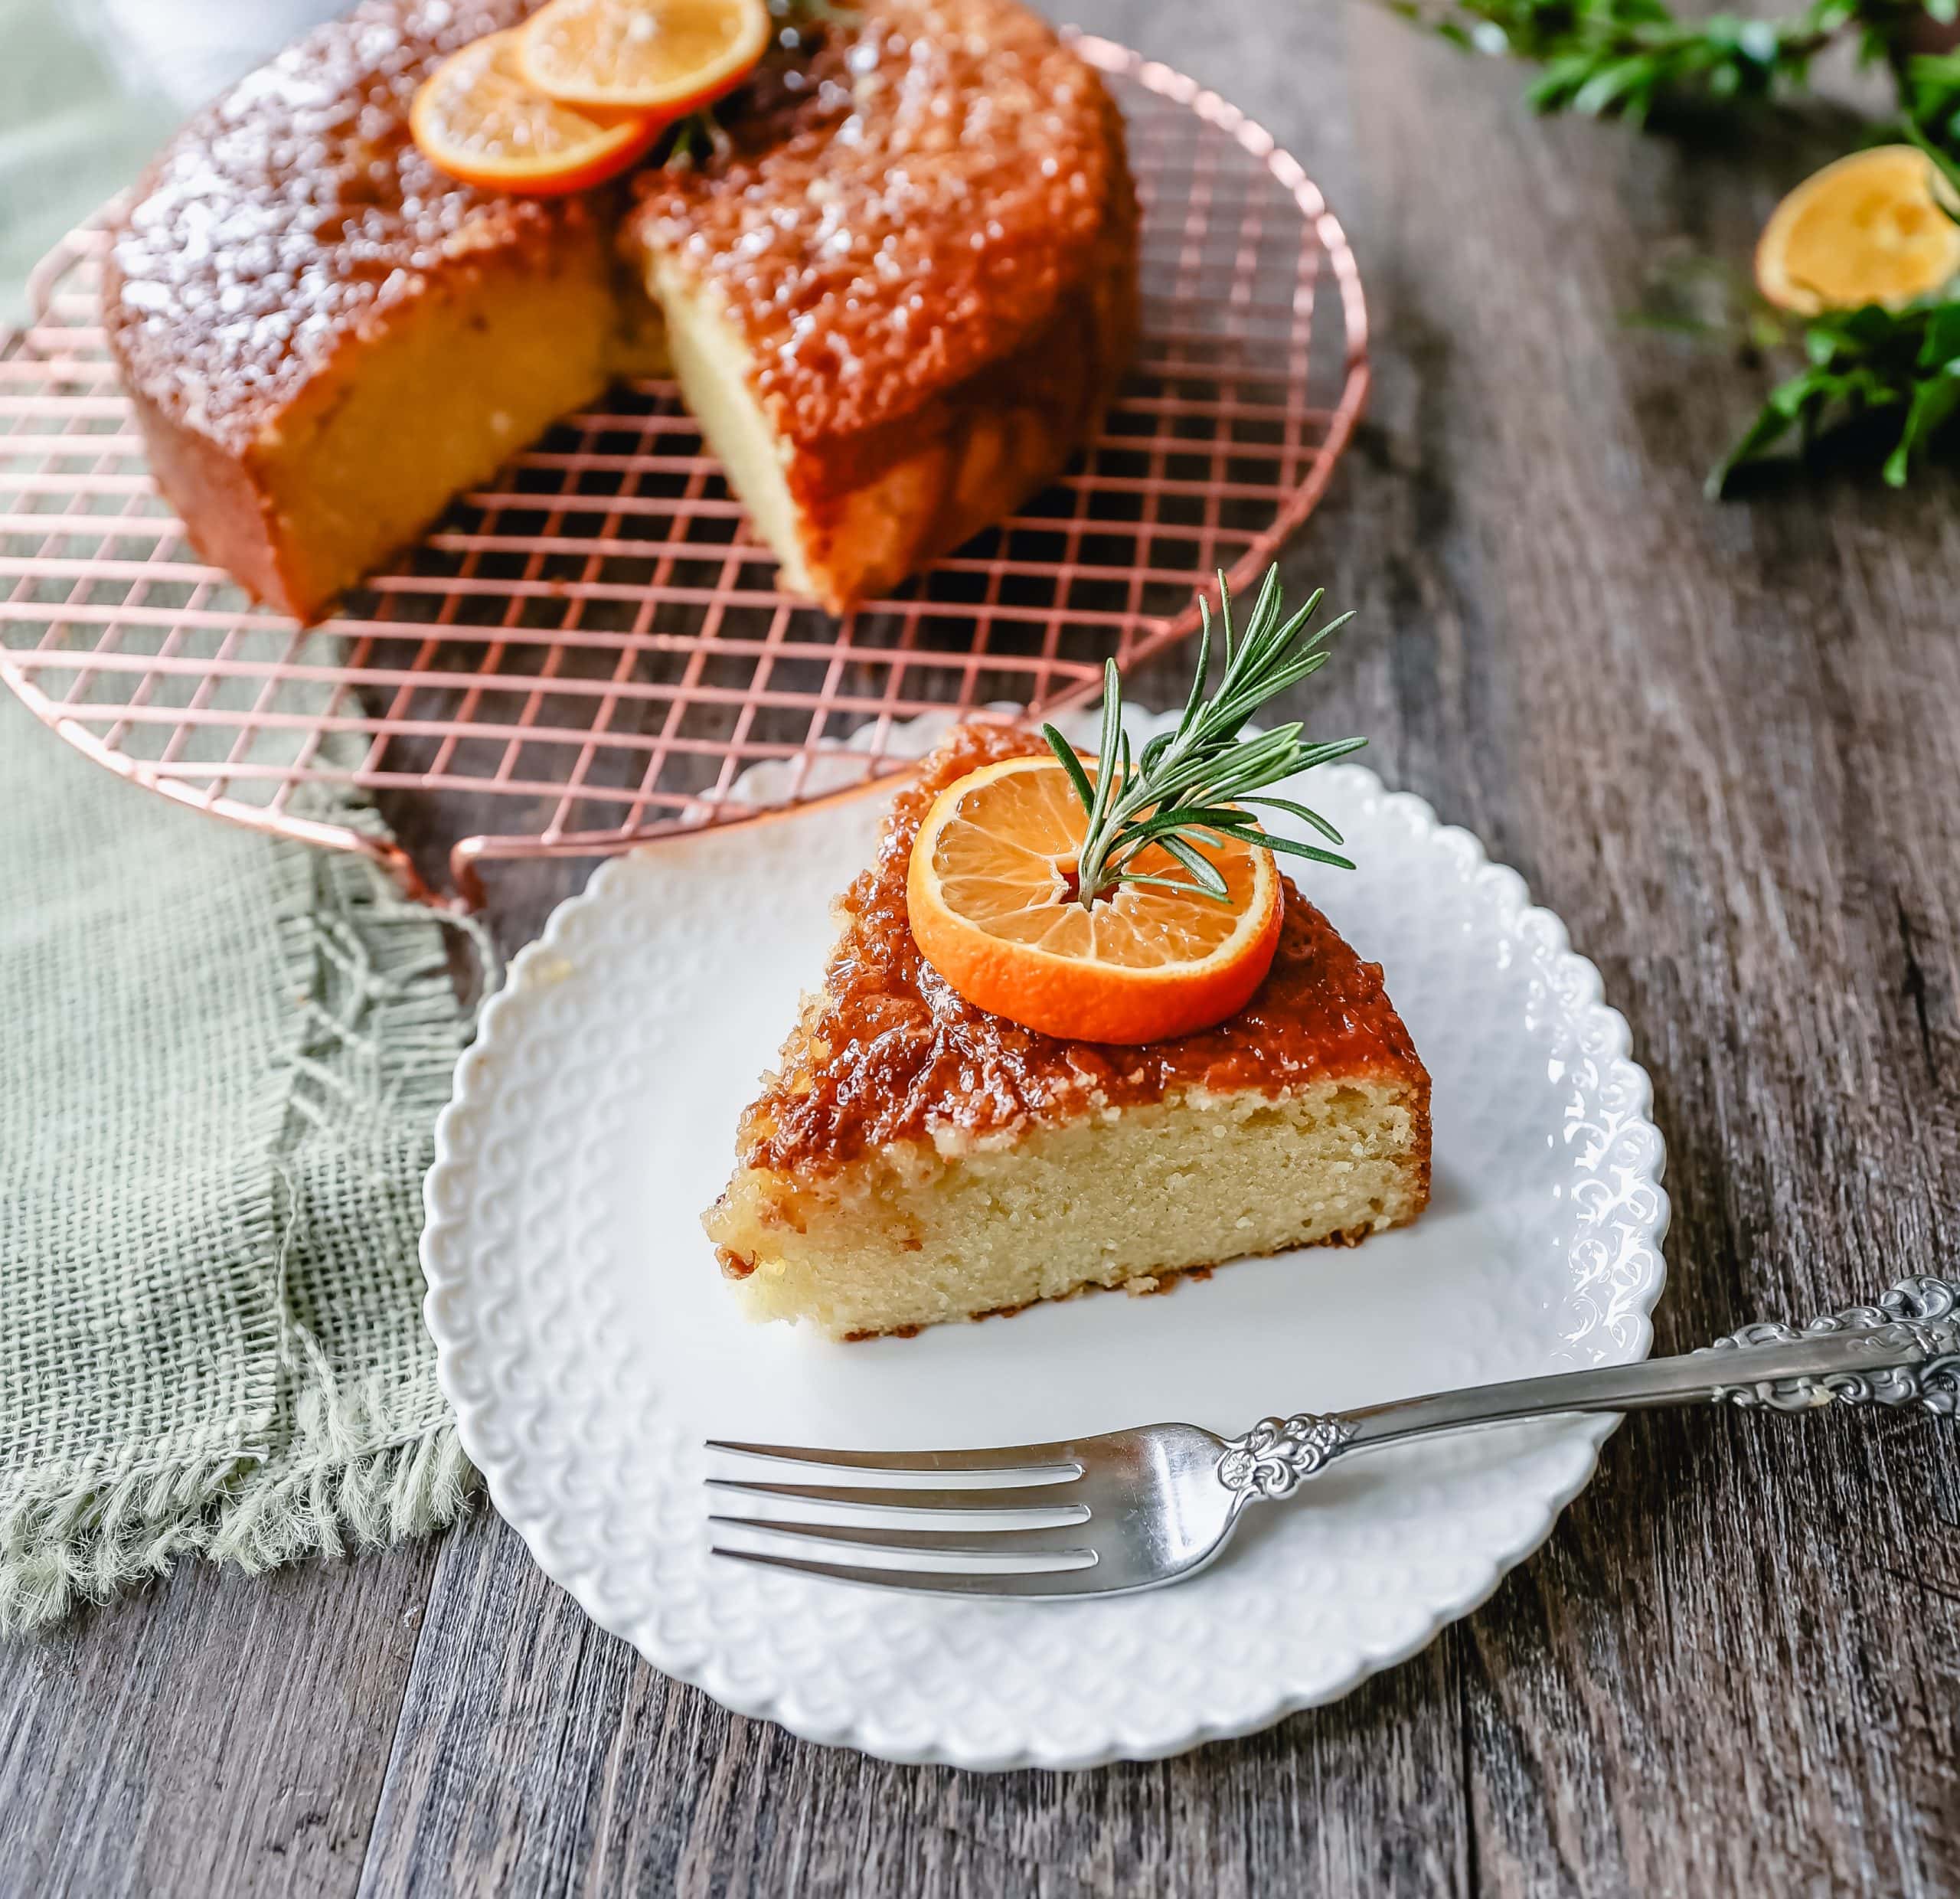 Olive Oil Cake A homemade olive oil cake with vanilla and almond extracts and topped with a glaze. This vanilla olive oil cake is the perfect simple dessert. 